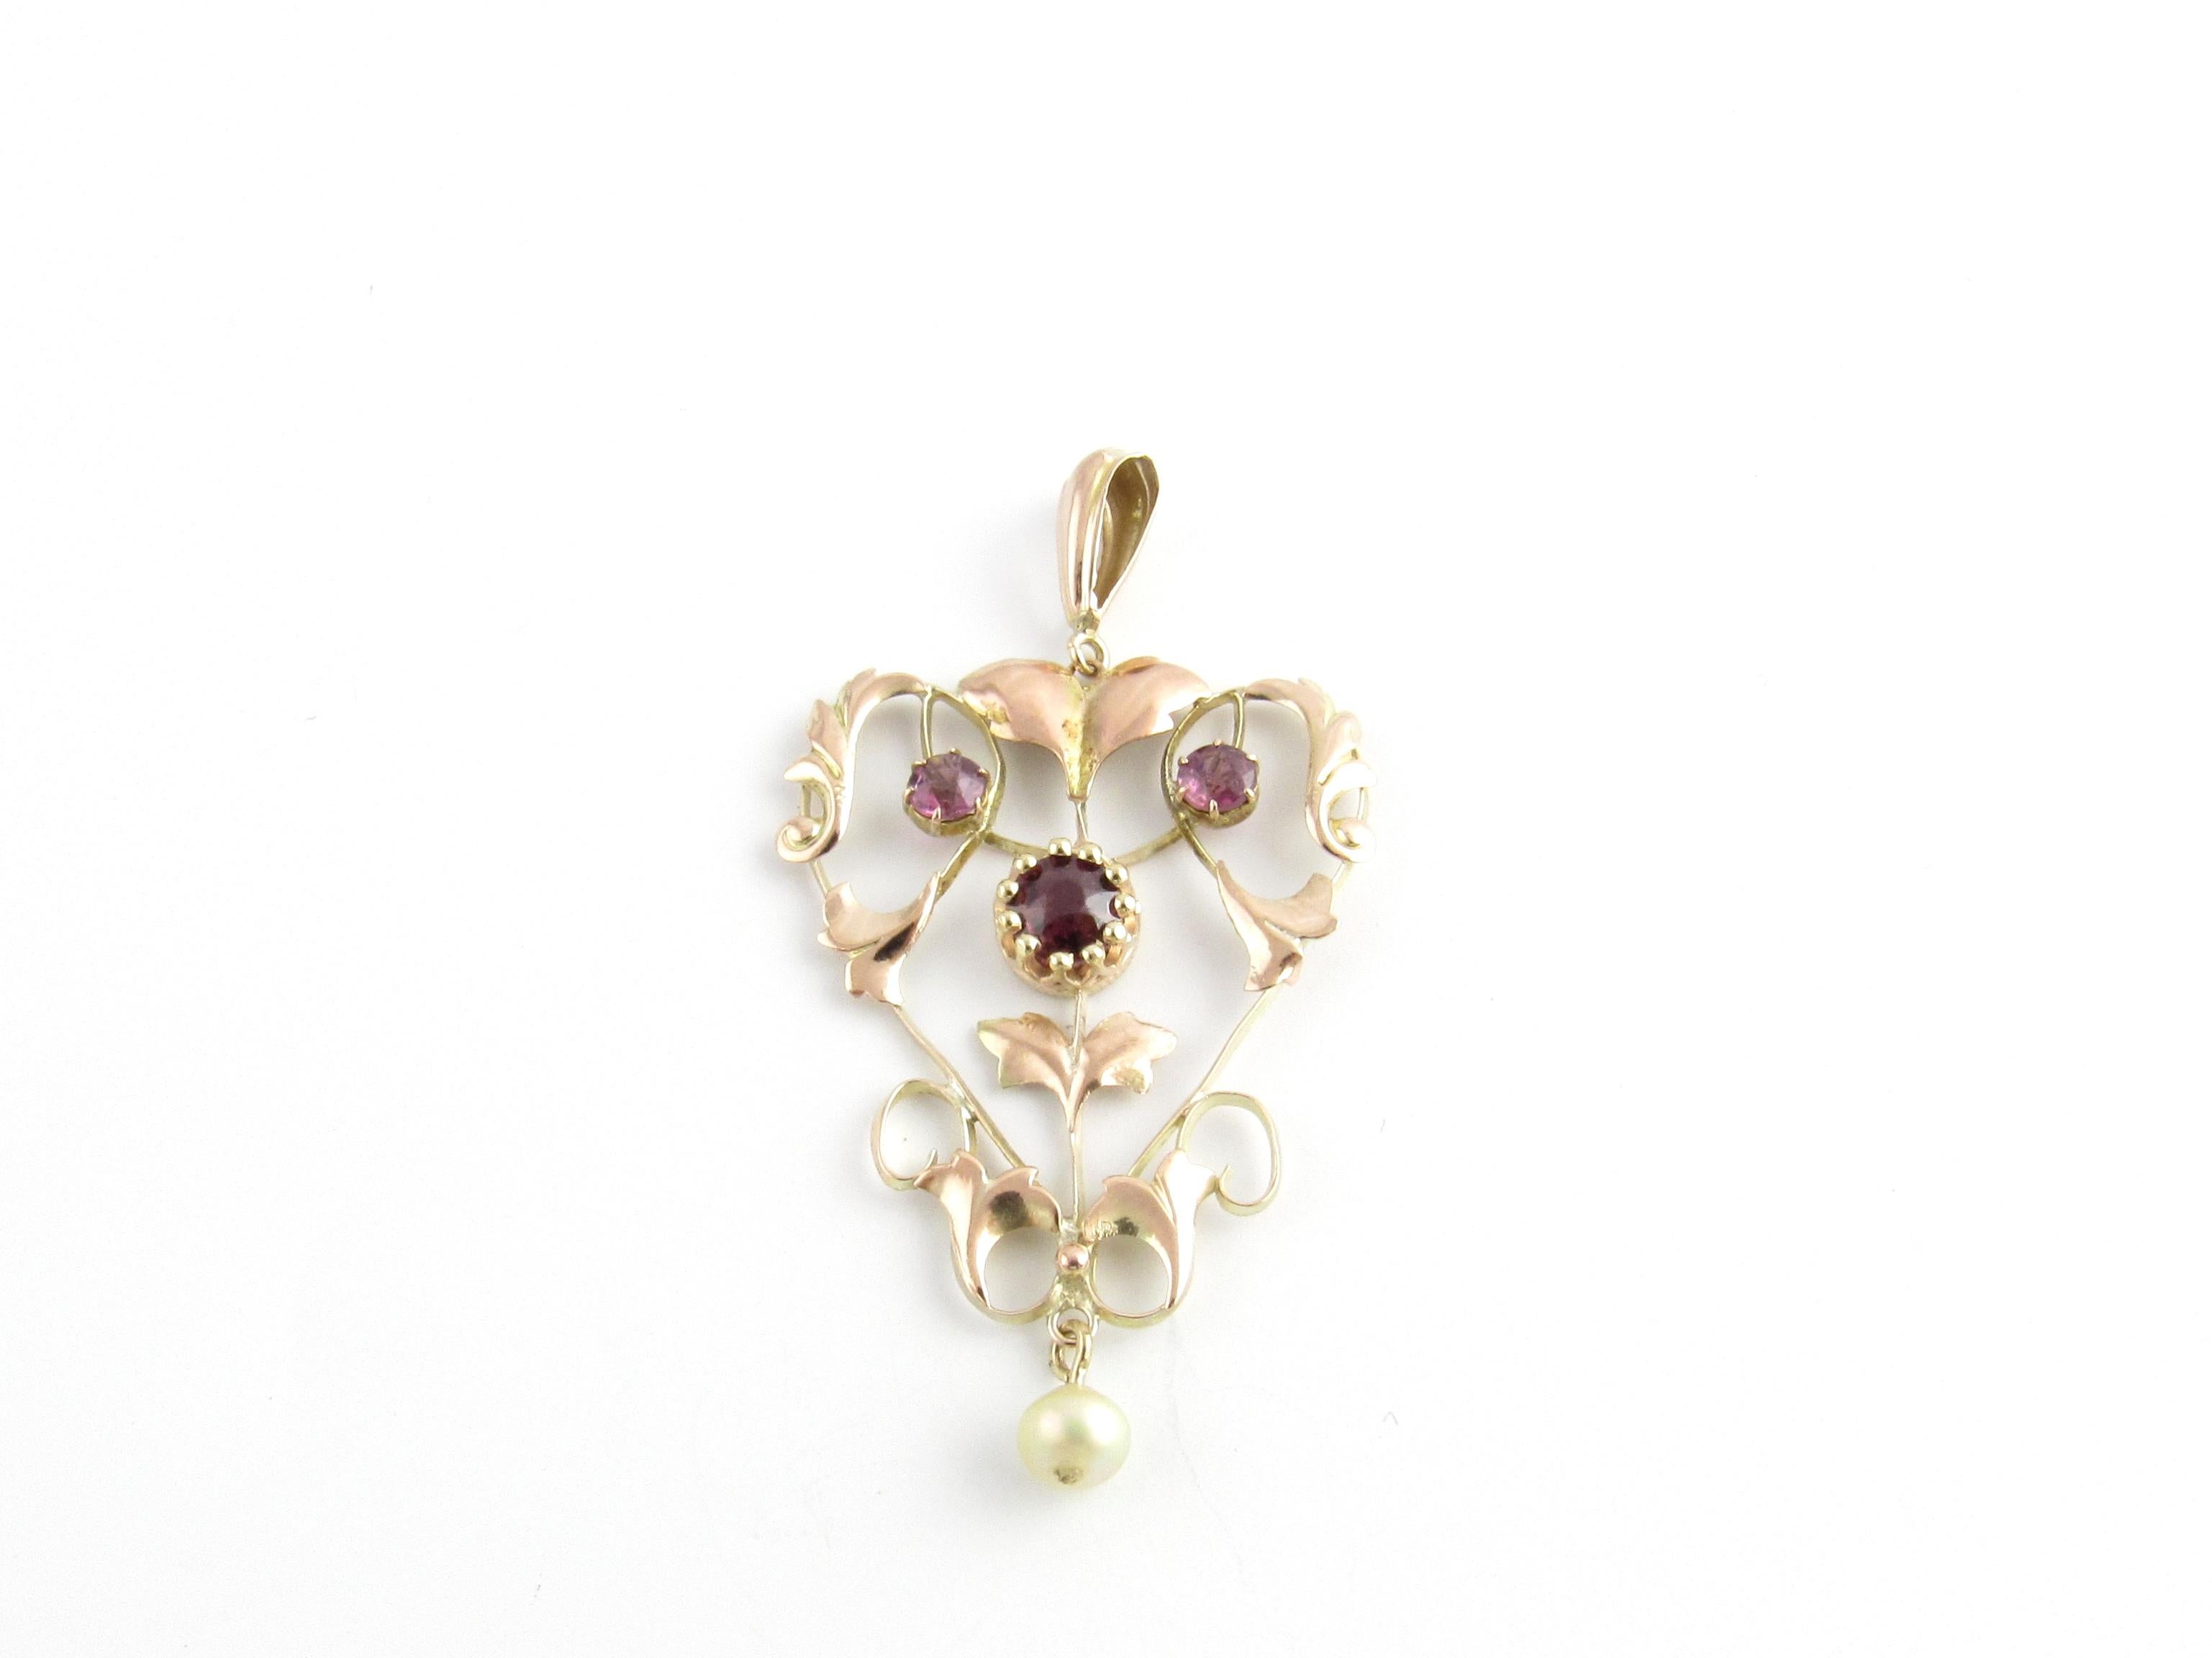 Vintage 14 Karat Yellow Gold Garnet and Pearl Pendant

This lovely pendant features thee rhodolite garnets and one dangling seed pearl set in beautifully detailed 14K yellow gold.

Size: 32 mm x 26 mm

Weight: 1.6 dwt. / 2.5 gr.

Acid tested for 14K